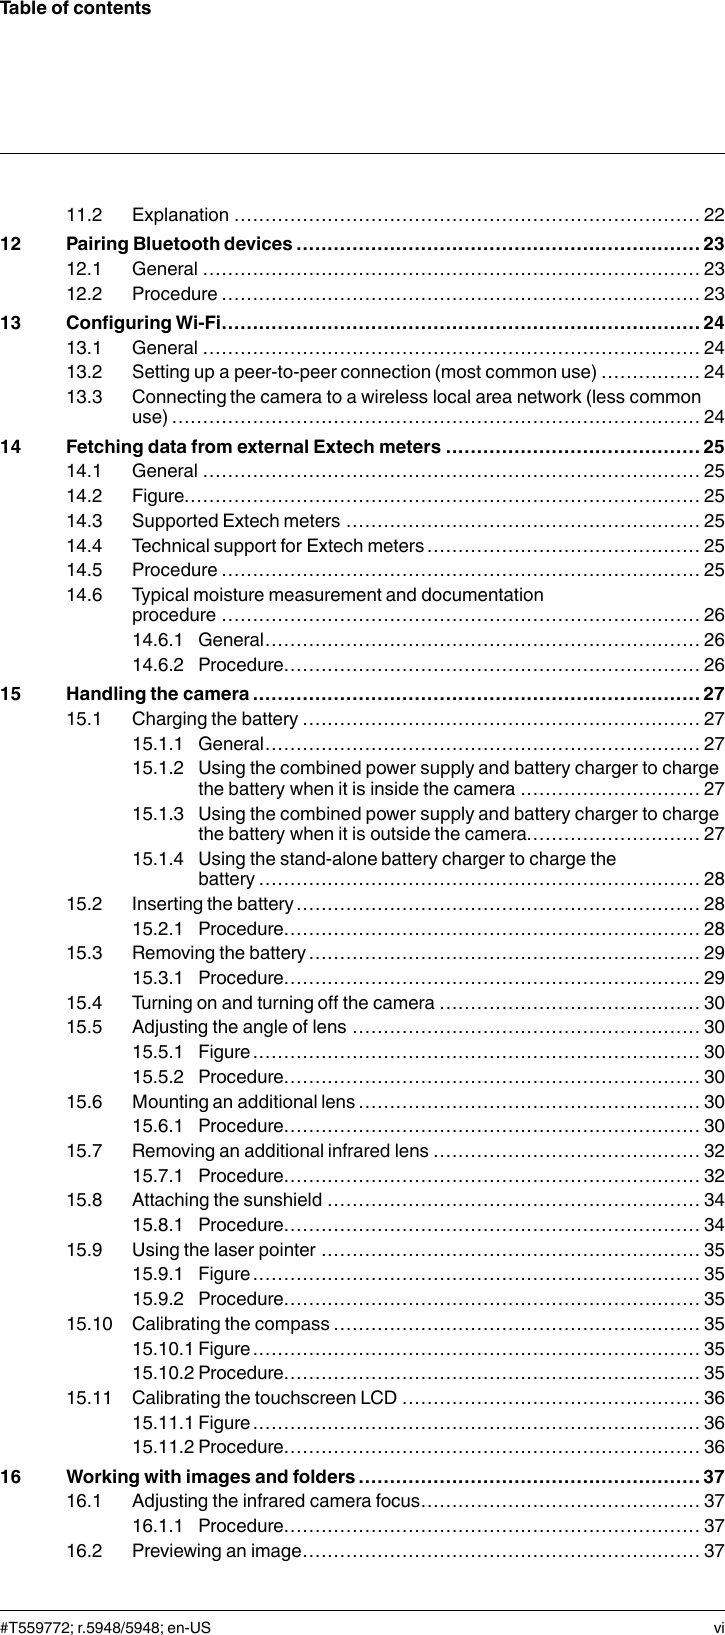 Table of contents11.2 Explanation ........................................................................... 2212 Pairing Bluetooth devices ................................................................. 2312.1 General ................................................................................ 2312.2 Procedure ............................................................................. 2313 Configuring Wi-Fi............................................................................. 2413.1 General ................................................................................ 2413.2 Setting up a peer-to-peer connection (most common use) ................ 2413.3 Connecting the camera to a wireless local area network (less commonuse) ..................................................................................... 2414 Fetching data from external Extech meters ......................................... 2514.1 General ................................................................................ 2514.2 Figure................................................................................... 2514.3 Supported Extech meters ......................................................... 2514.4 Technical support for Extech meters ............................................ 2514.5 Procedure ............................................................................. 2514.6 Typical moisture measurement and documentationprocedure ............................................................................. 2614.6.1 General...................................................................... 2614.6.2 Procedure................................................................... 2615 Handling the camera ........................................................................ 2715.1 Charging the battery ................................................................ 2715.1.1 General...................................................................... 2715.1.2 Using the combined power supply and battery charger to chargethe battery when it is inside the camera ............................. 2715.1.3 Using the combined power supply and battery charger to chargethe battery when it is outside the camera............................ 2715.1.4 Using the stand-alone battery charger to charge thebattery ....................................................................... 2815.2 Inserting the battery ................................................................. 2815.2.1 Procedure................................................................... 2815.3 Removing the battery............................................................... 2915.3.1 Procedure................................................................... 2915.4 Turning on and turning off the camera .......................................... 3015.5 Adjusting the angle of lens ........................................................ 3015.5.1 Figure........................................................................ 3015.5.2 Procedure................................................................... 3015.6 Mounting an additional lens ....................................................... 3015.6.1 Procedure................................................................... 3015.7 Removing an additional infrared lens ........................................... 3215.7.1 Procedure................................................................... 3215.8 Attaching the sunshield ............................................................ 3415.8.1 Procedure................................................................... 3415.9 Using the laser pointer ............................................................. 3515.9.1 Figure........................................................................ 3515.9.2 Procedure................................................................... 3515.10 Calibrating the compass ........................................................... 3515.10.1 Figure........................................................................ 3515.10.2 Procedure................................................................... 3515.11 Calibrating the touchscreen LCD ................................................ 3615.11.1 Figure........................................................................ 3615.11.2 Procedure................................................................... 3616 Working with images and folders ....................................................... 3716.1 Adjusting the infrared camera focus............................................. 3716.1.1 Procedure................................................................... 3716.2 Previewing an image................................................................ 37#T559772; r.5948/5948; en-US vi